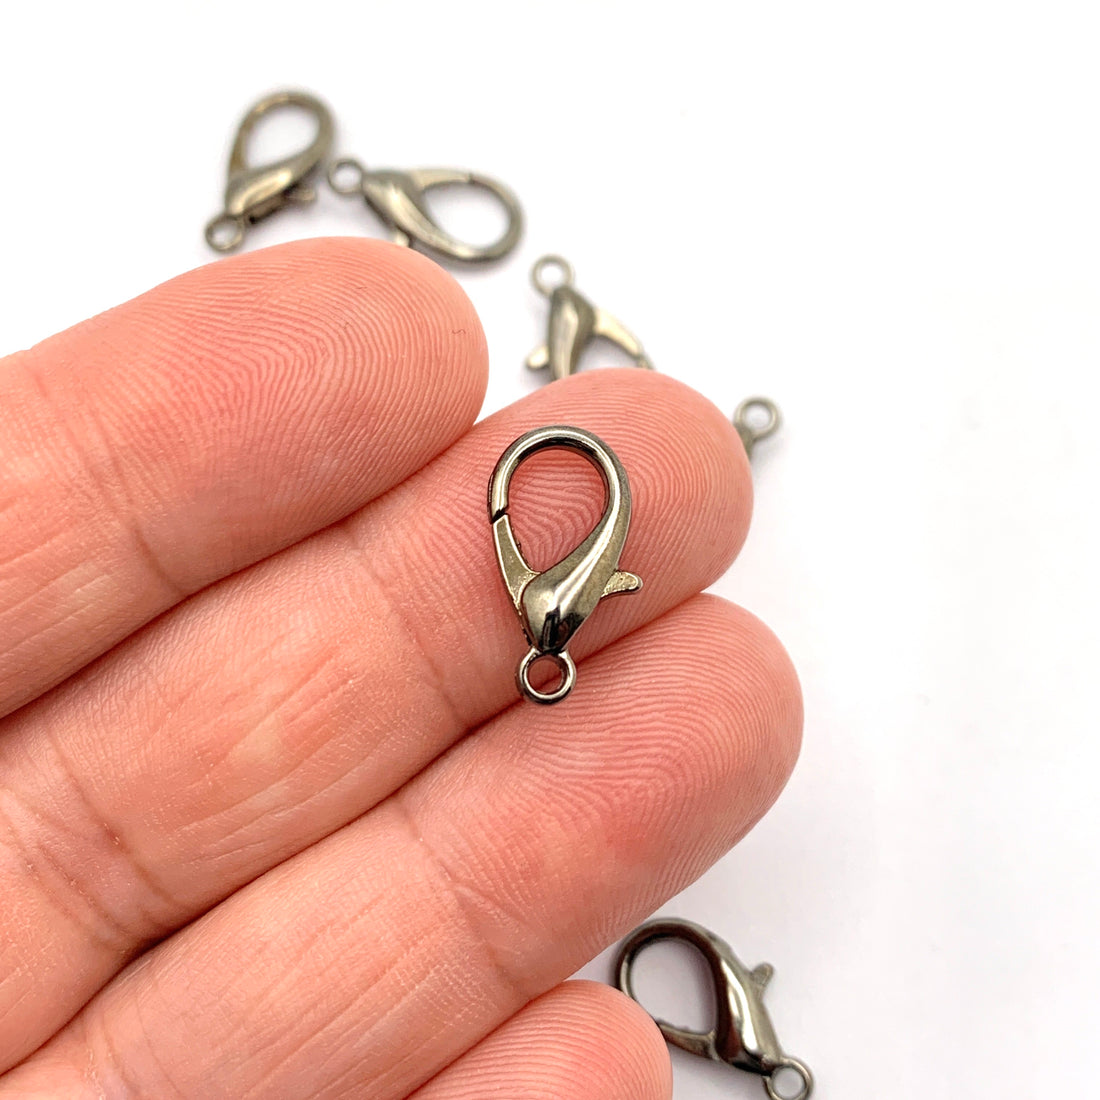 16x8mm Lobster Claw Clasp Findings, Gunmetal Colour - 10 Pack – Easy Crafts